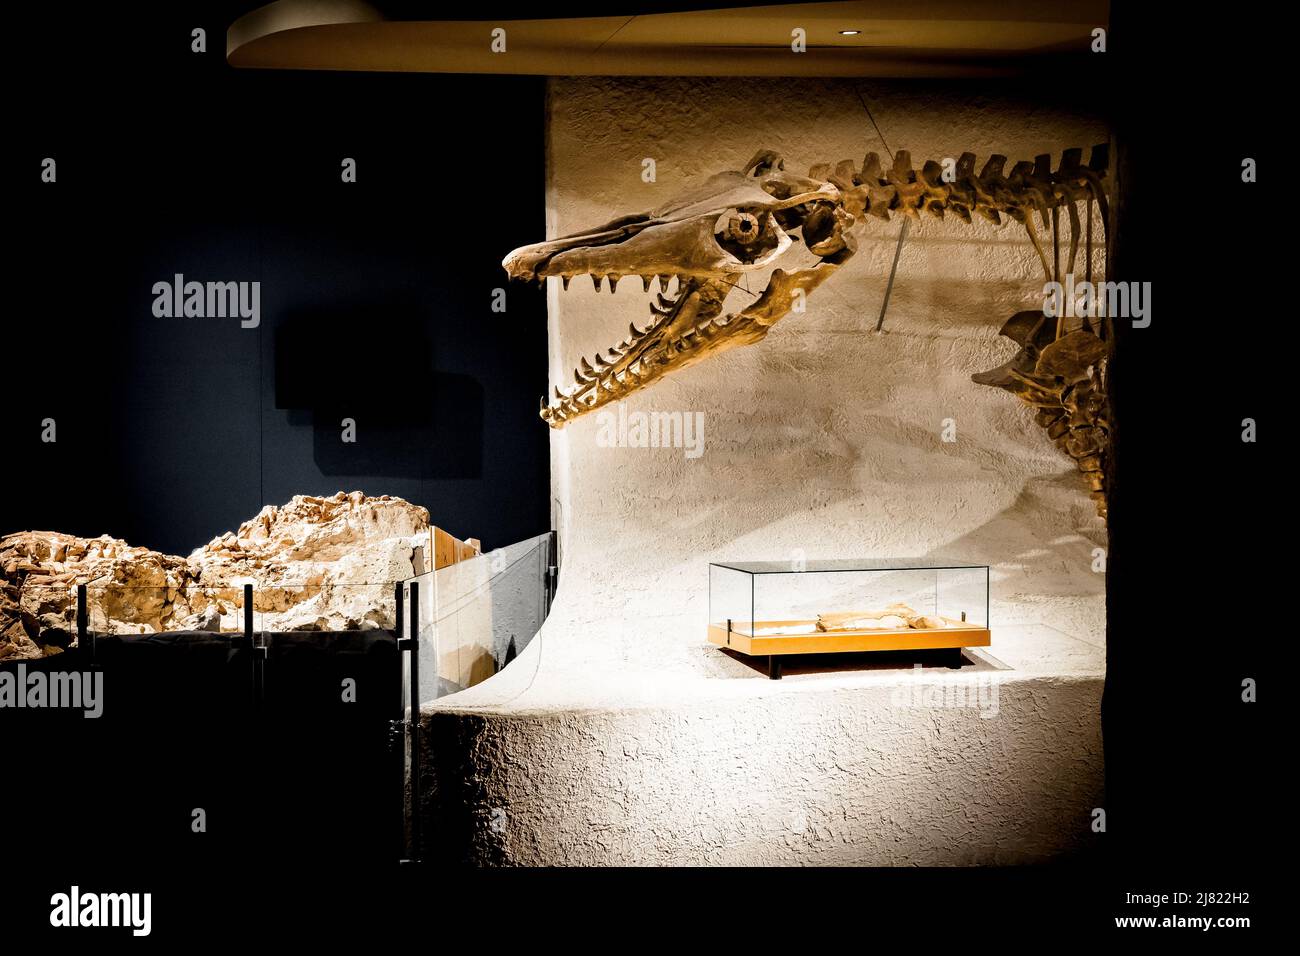 View of the huge skull and open jaws with large teeth of a Mosasaurus fossil at the Natural History Museum in Maastricht, the Netherlands Stock Photo